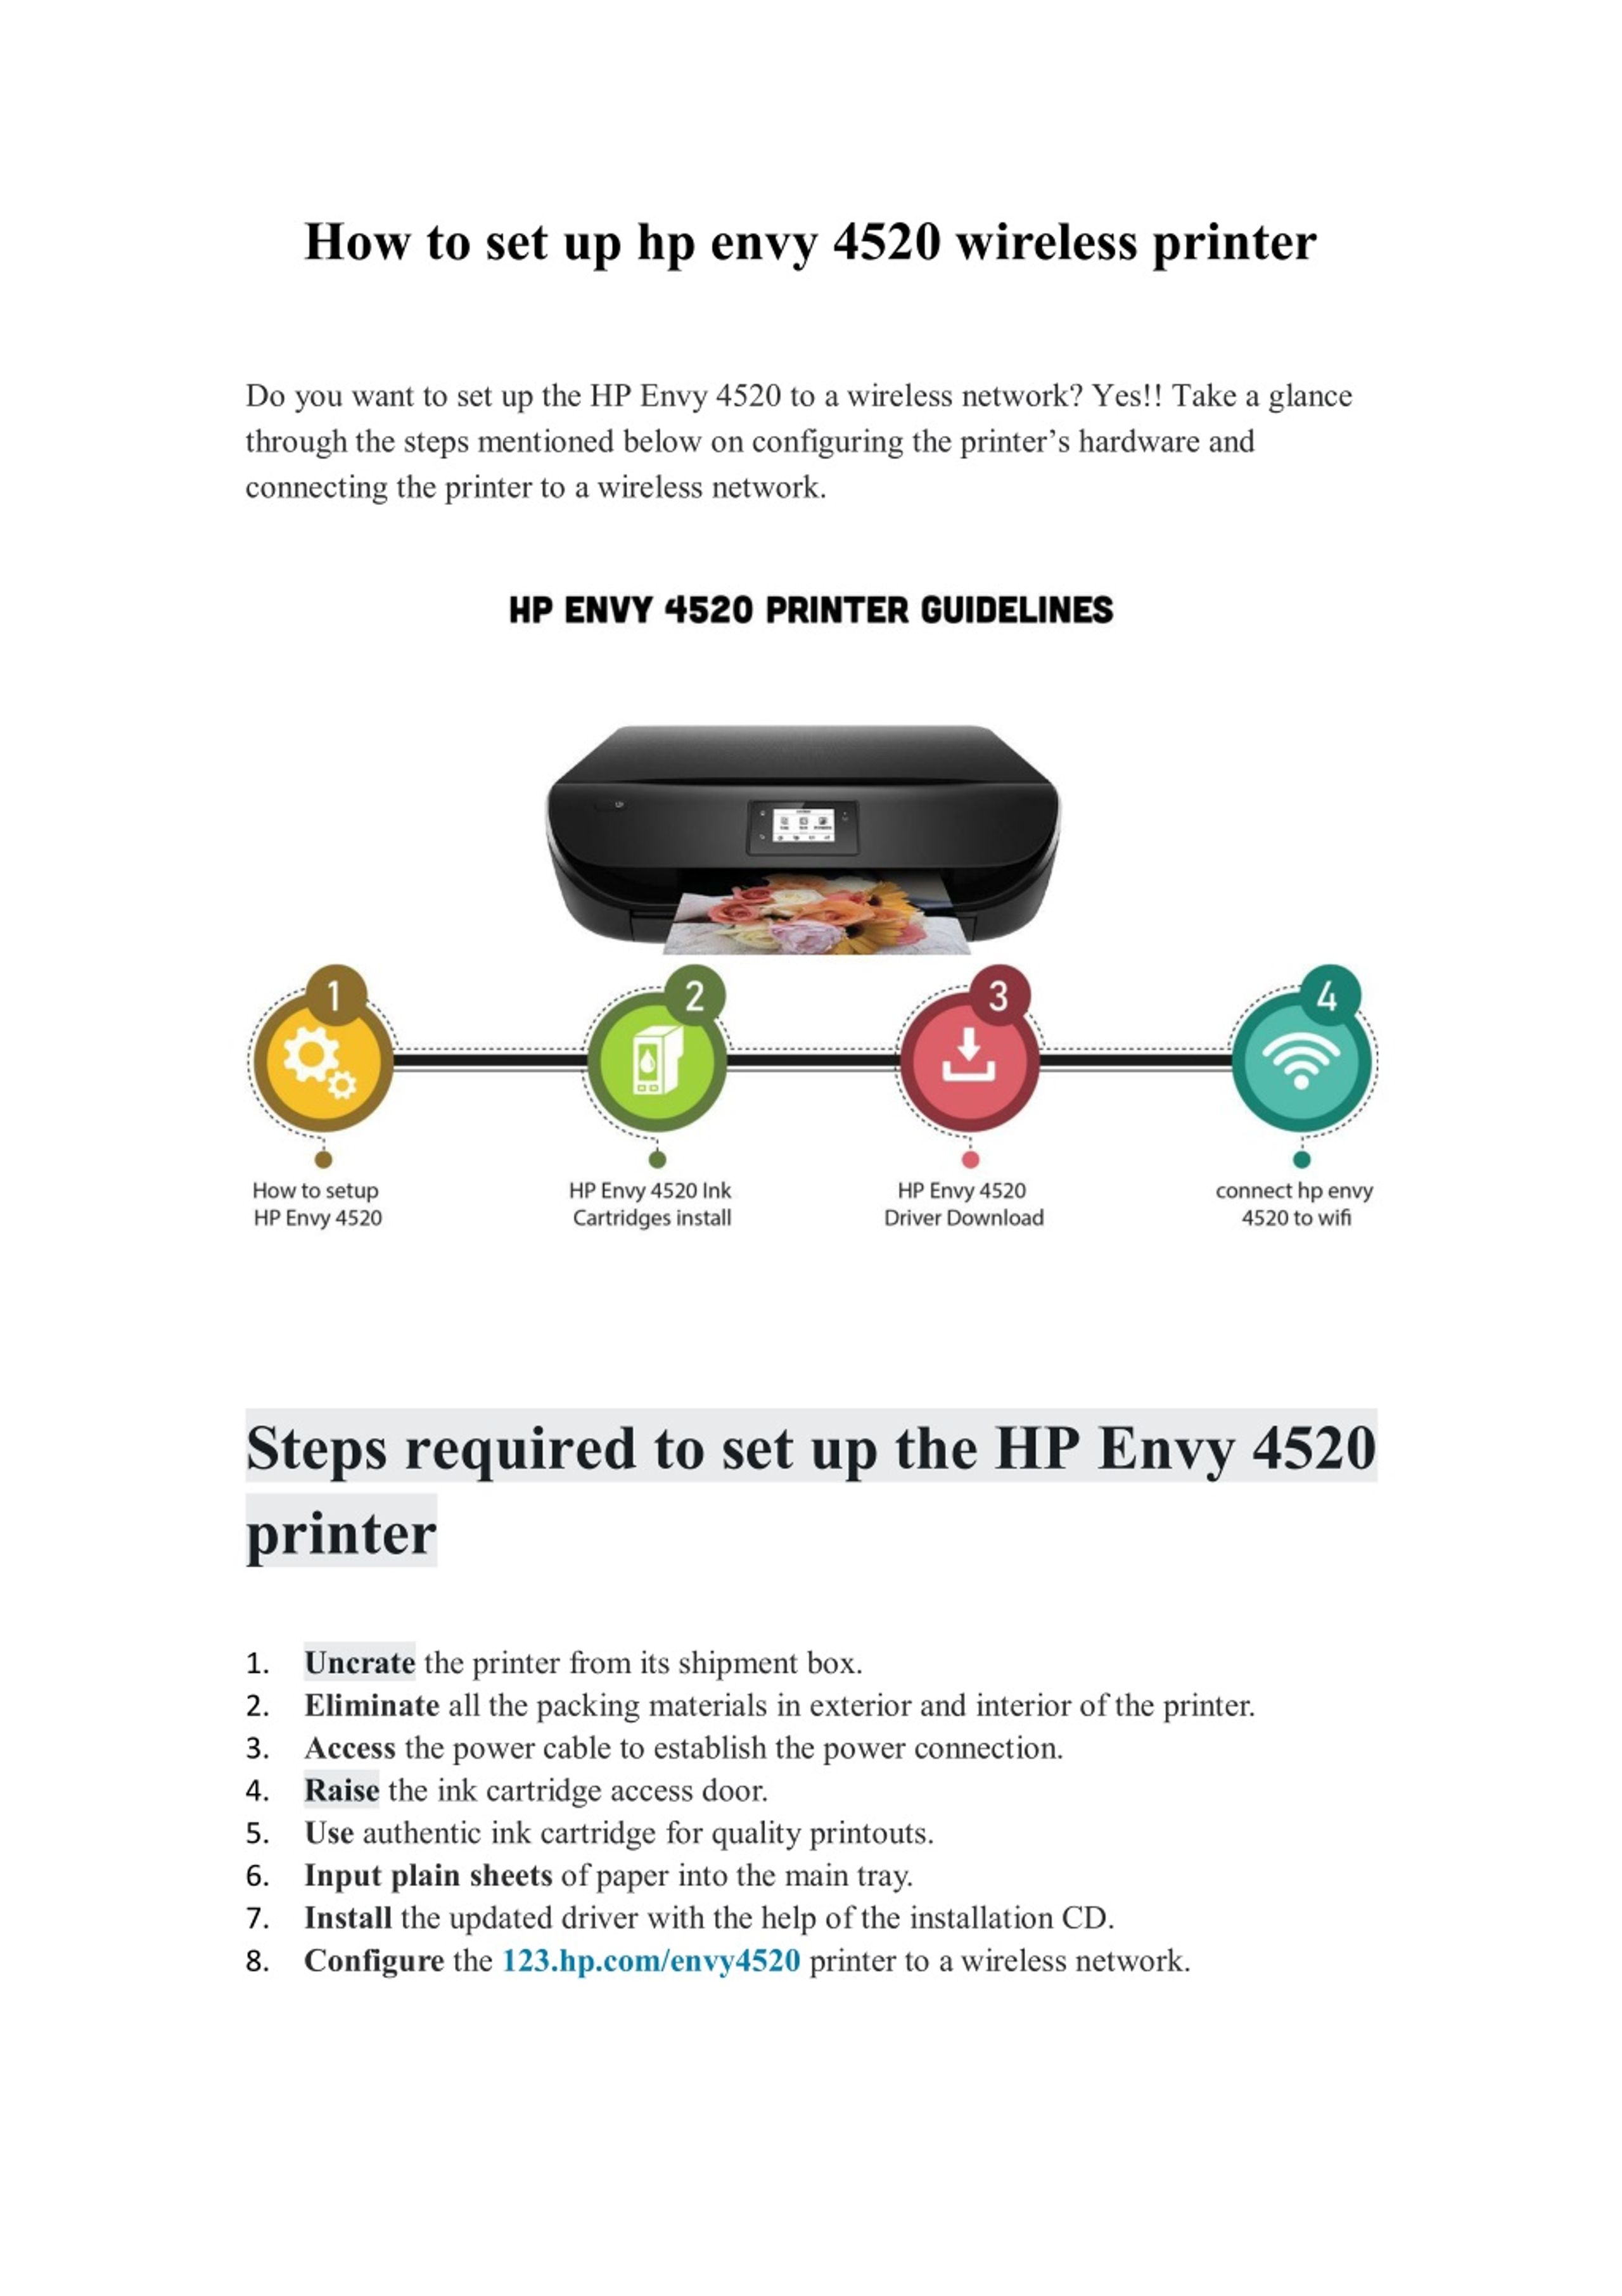 Ppt How To Setup Hp Envy 4520 Wireless Printer Solutions Powerpoint Presentation Id8163693 4791